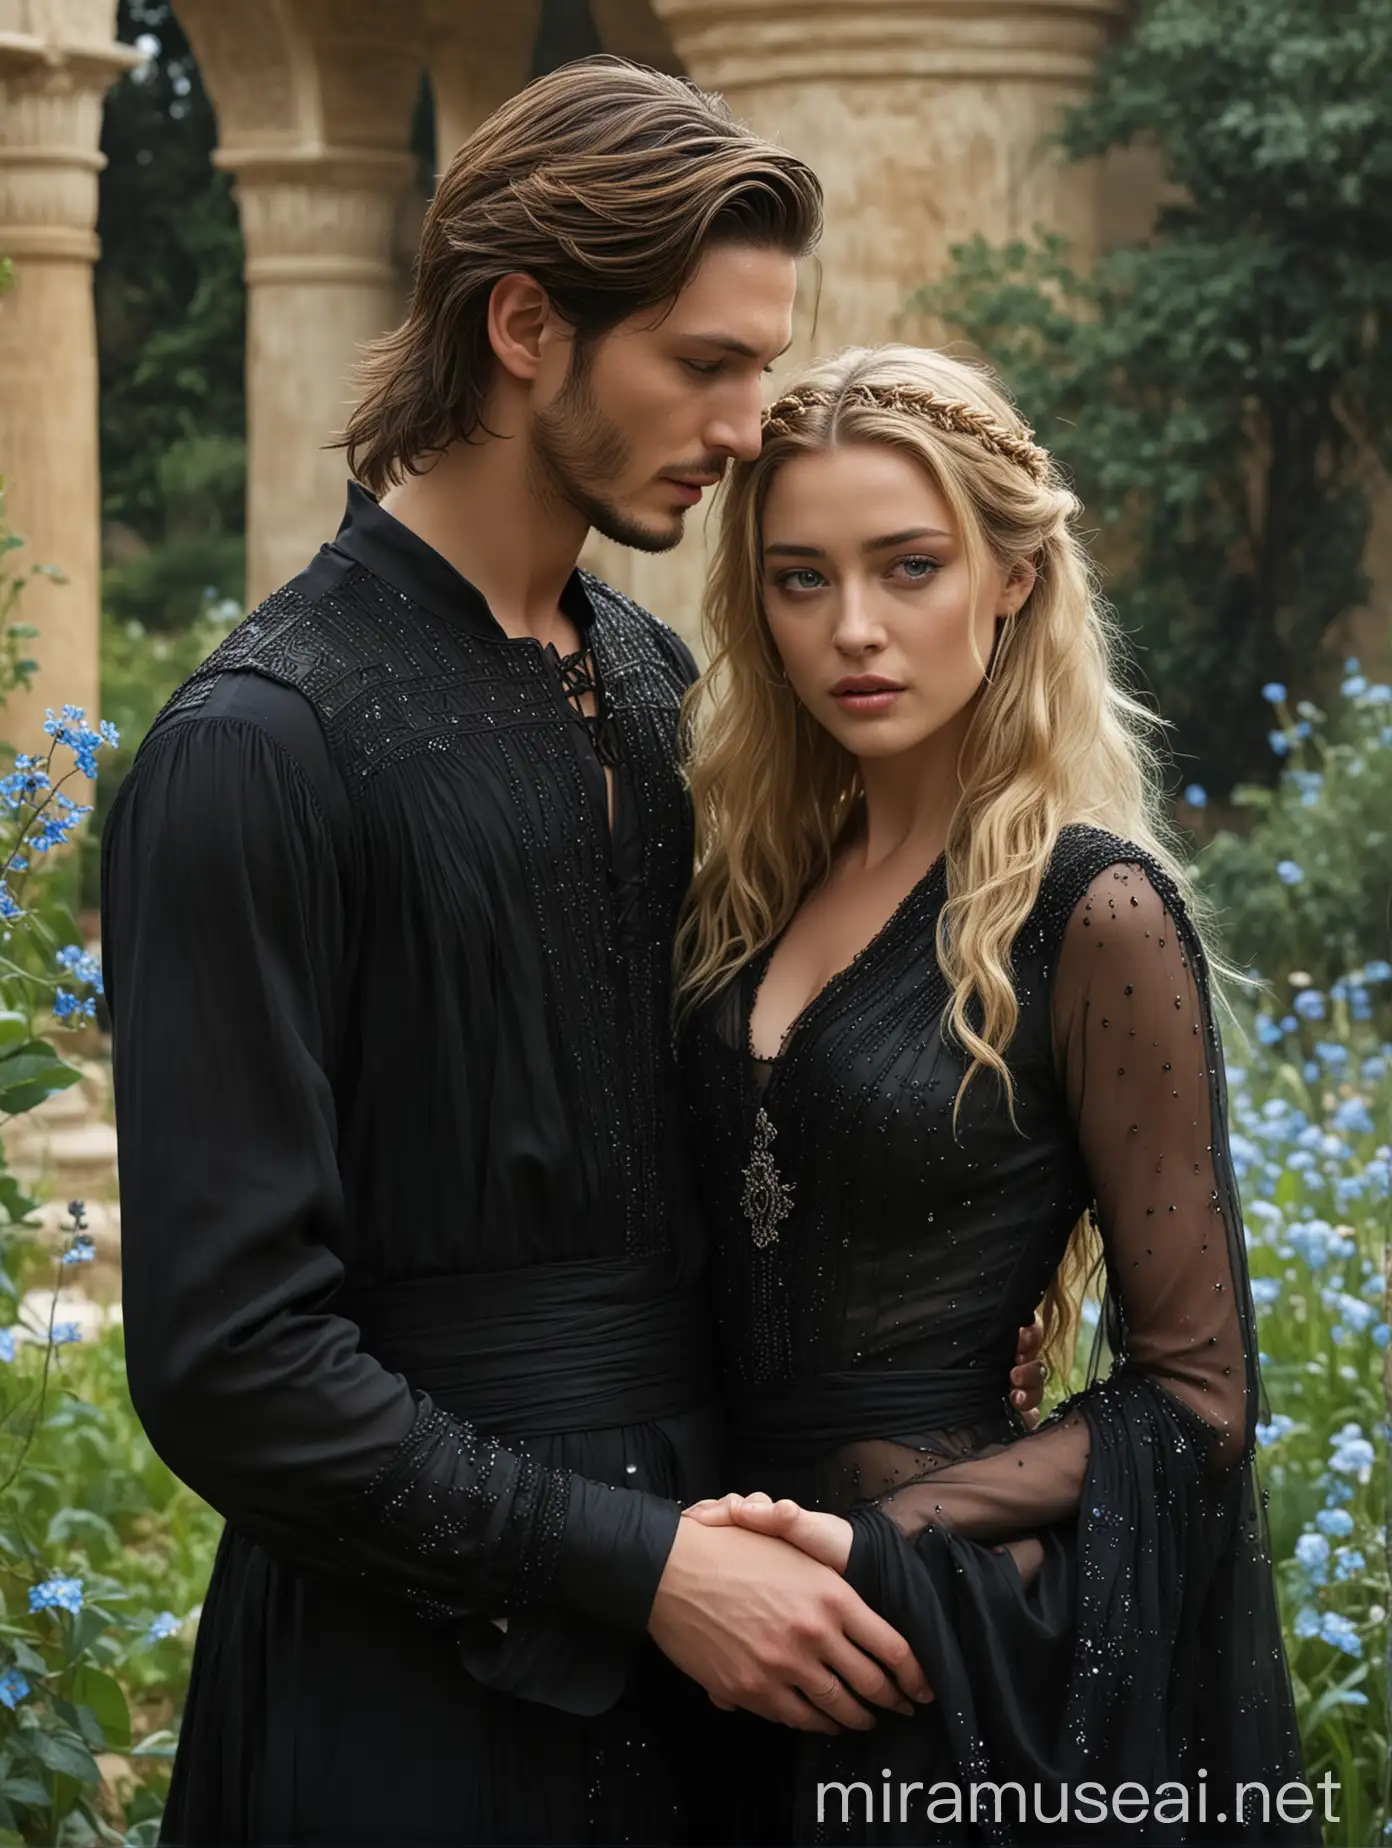 Ben Barnes and Amber Heard as a couple inlove, thet are in a garden of a Egyptian palace, ethereal atmosphere, wizard clothing fantasy, masterpiece, top quality, She is holding a pair of forget-me-nots flowers with her hands, she is wearing a sensual and semitransparent black silk chiffon dress made up of light particles of white crystal, the dress flows ethereally in the water until it mixes with the water until it disappears, She has has blonde hair, she has blue eyes, He is wearing Egyptian black clothes, he has brown hair, he has brown eyes, he has short hair